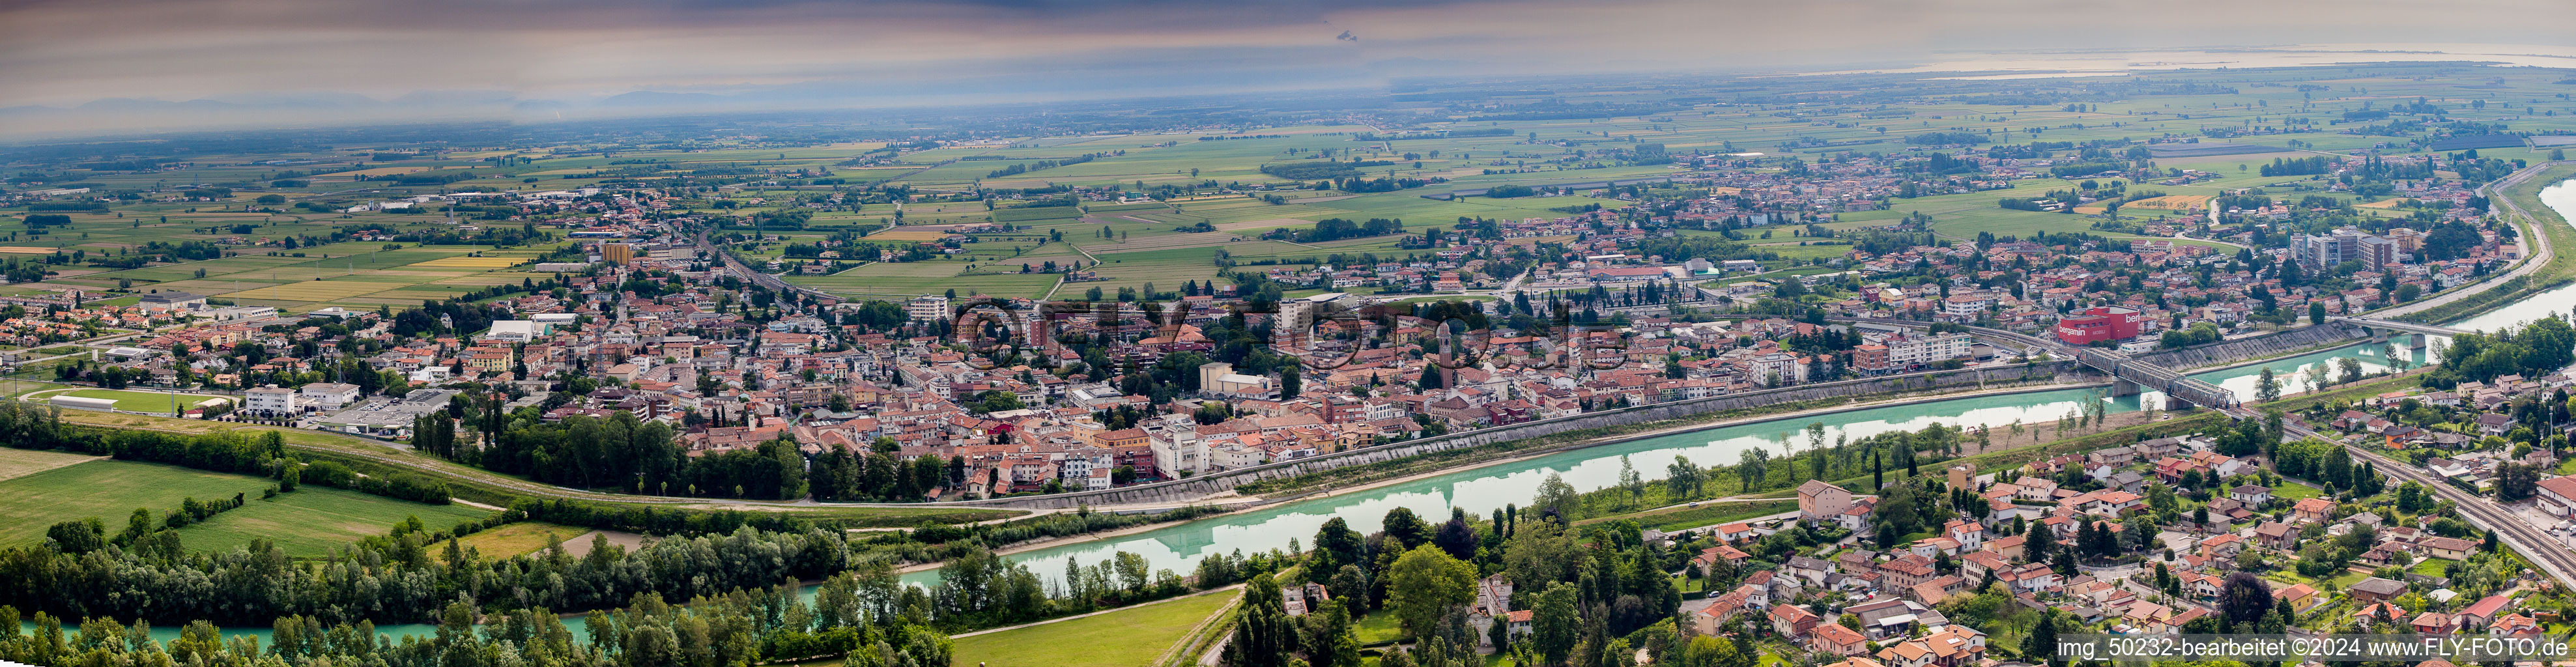 Panoramic perspective City center in the downtown area on the banks of river course of Tagliamento in Latisana in Friuli-Venezia Giulia, Italy